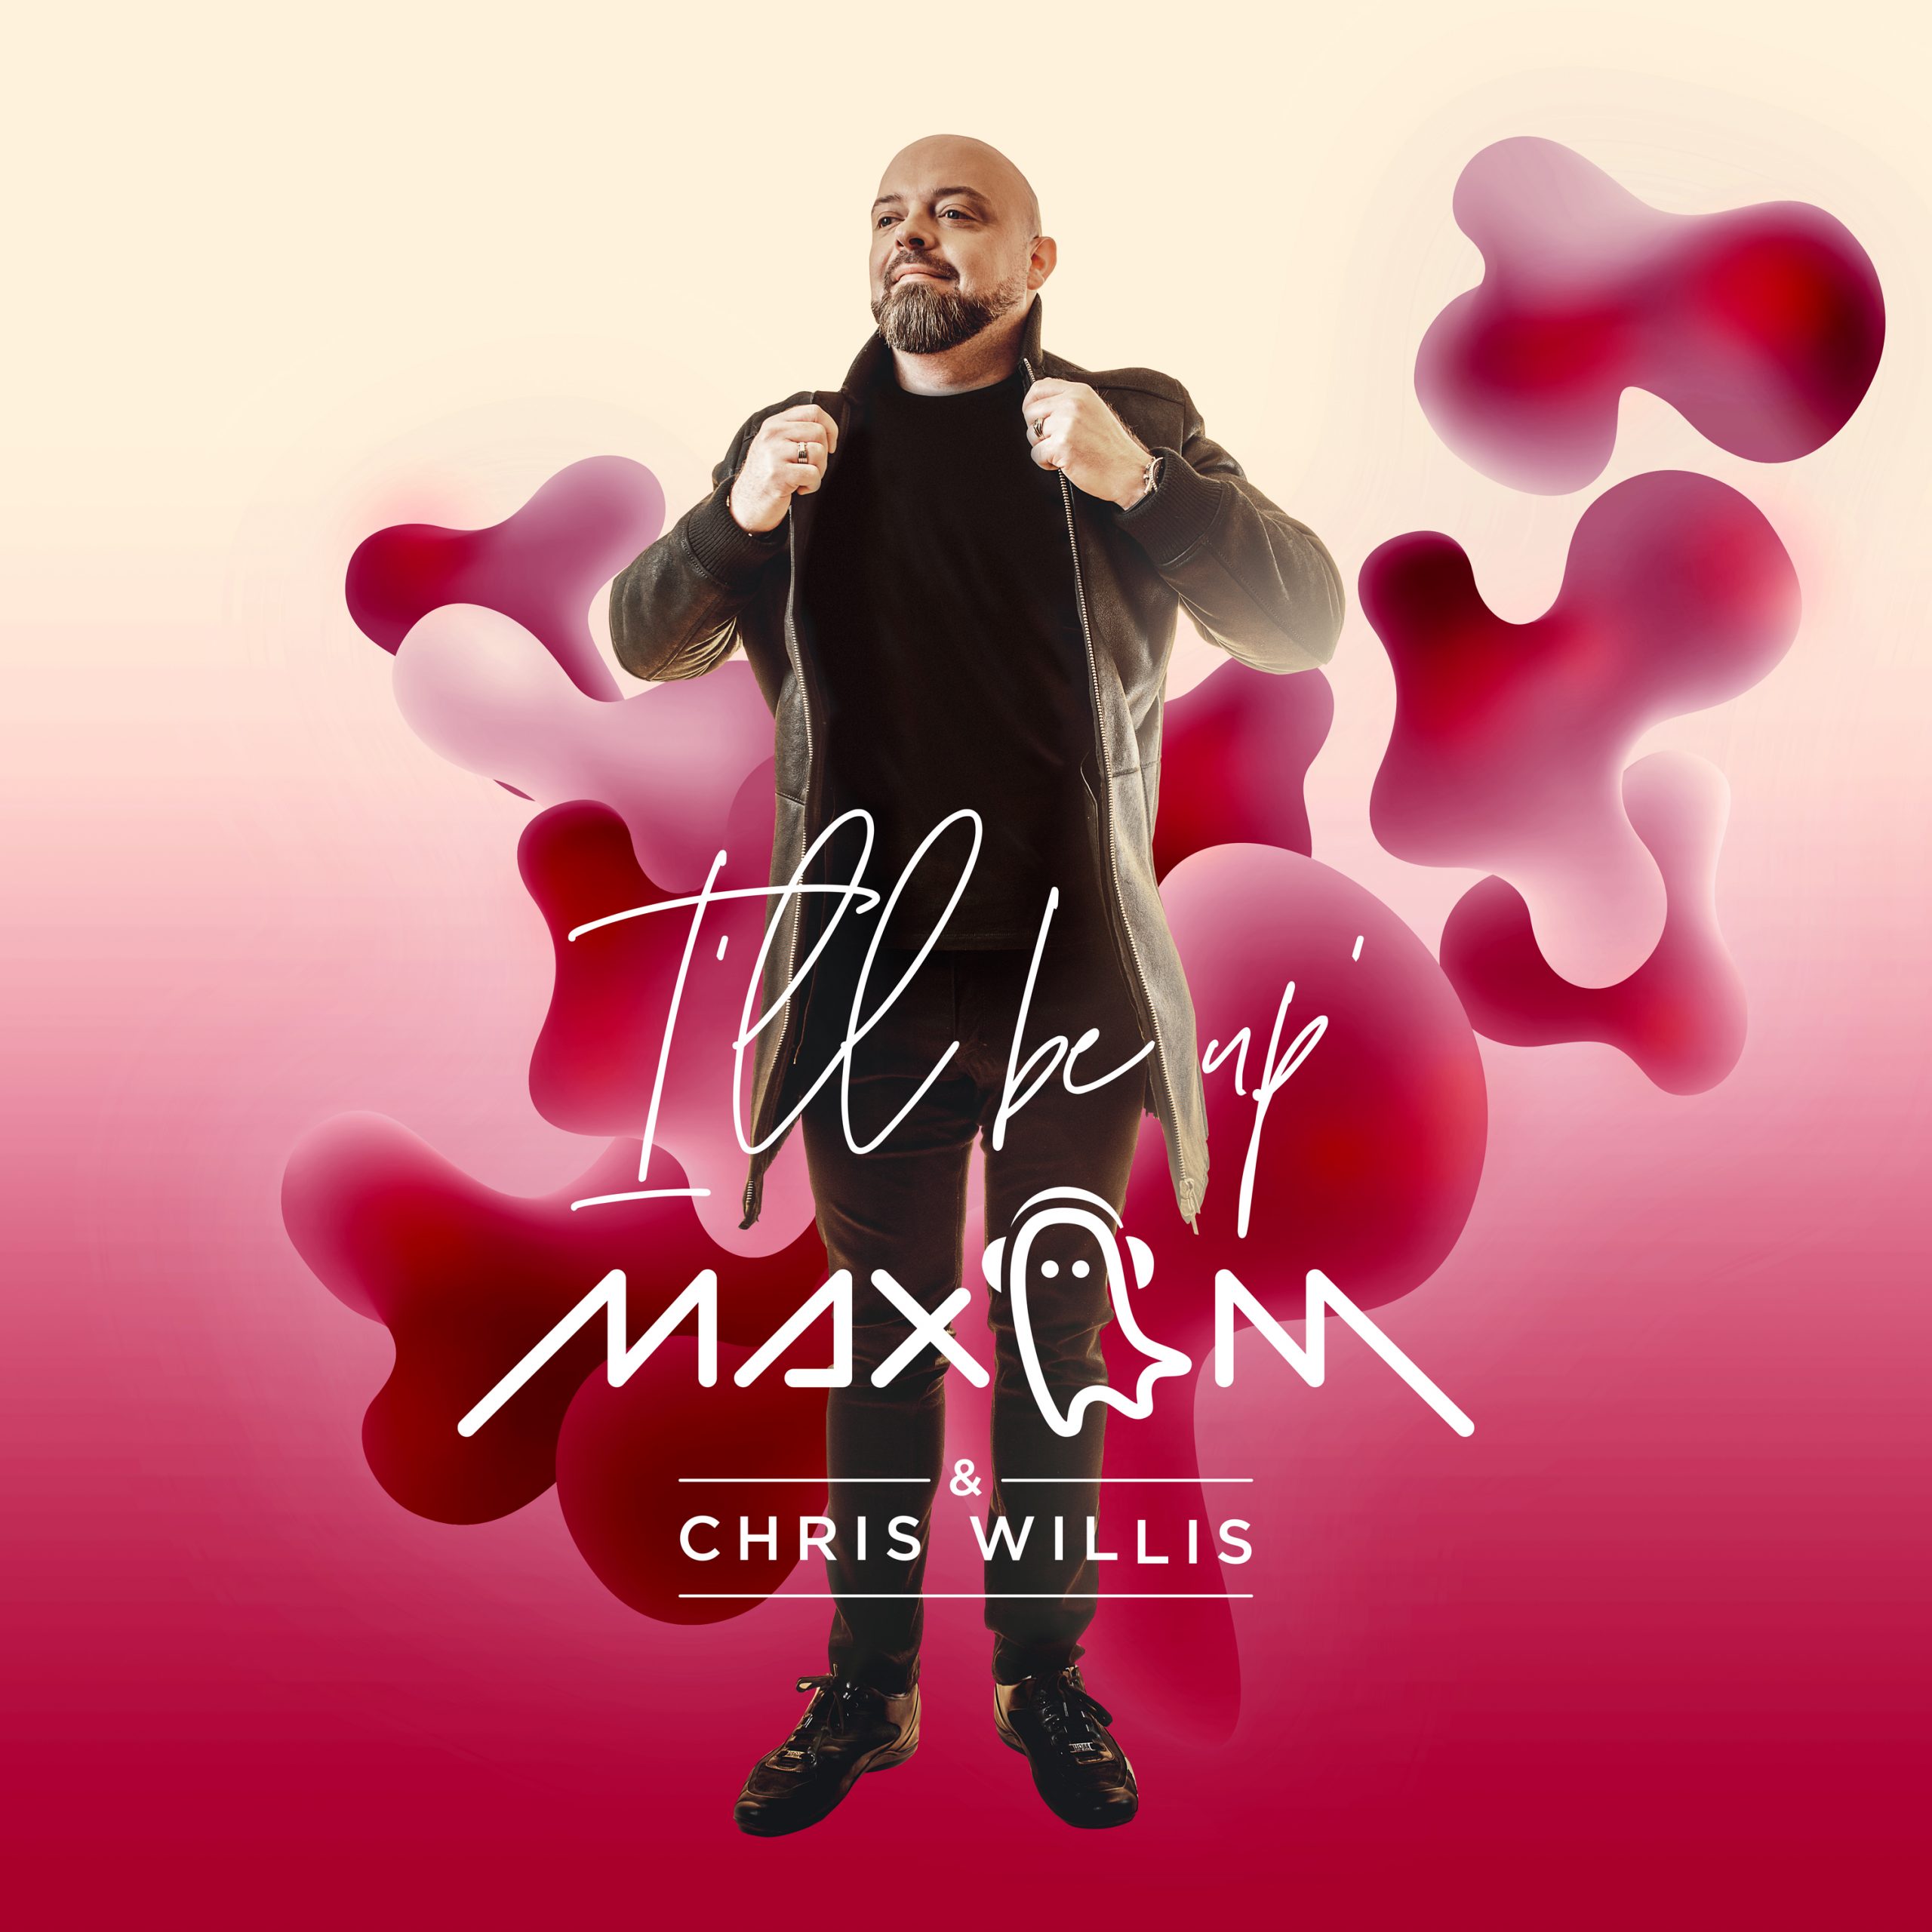 “I’ll Be Up” is the latest single from Max M, the multinational DJ and producer, featuring guest vocals from Chris Willis